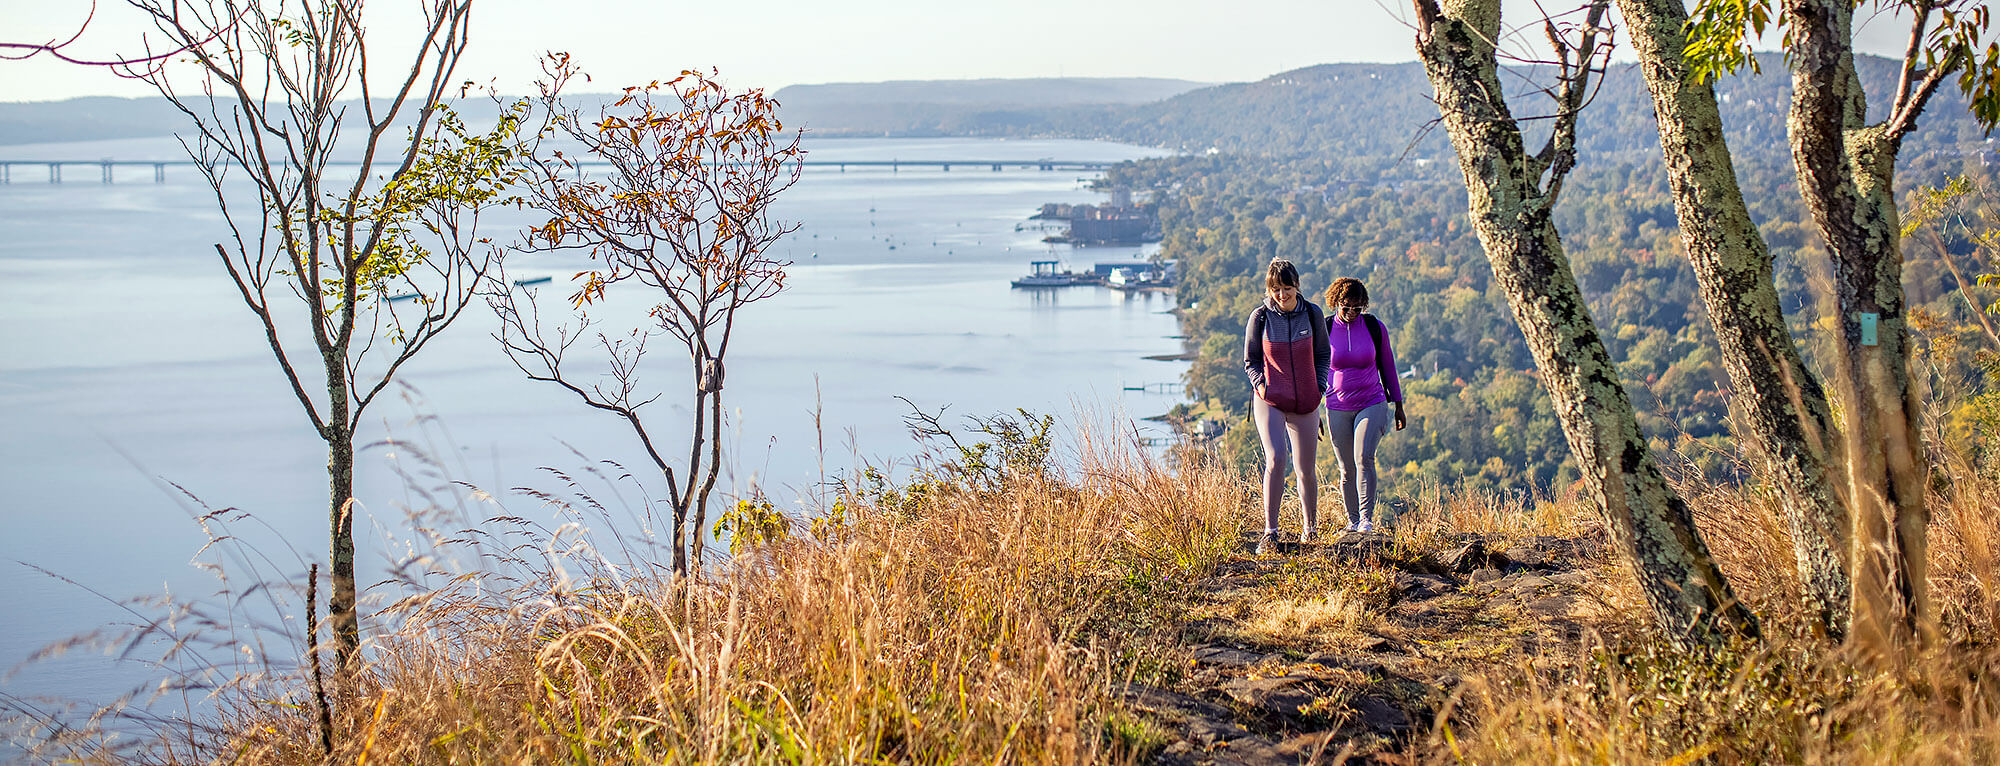 Two people standing on a hill overlooking a body of water.